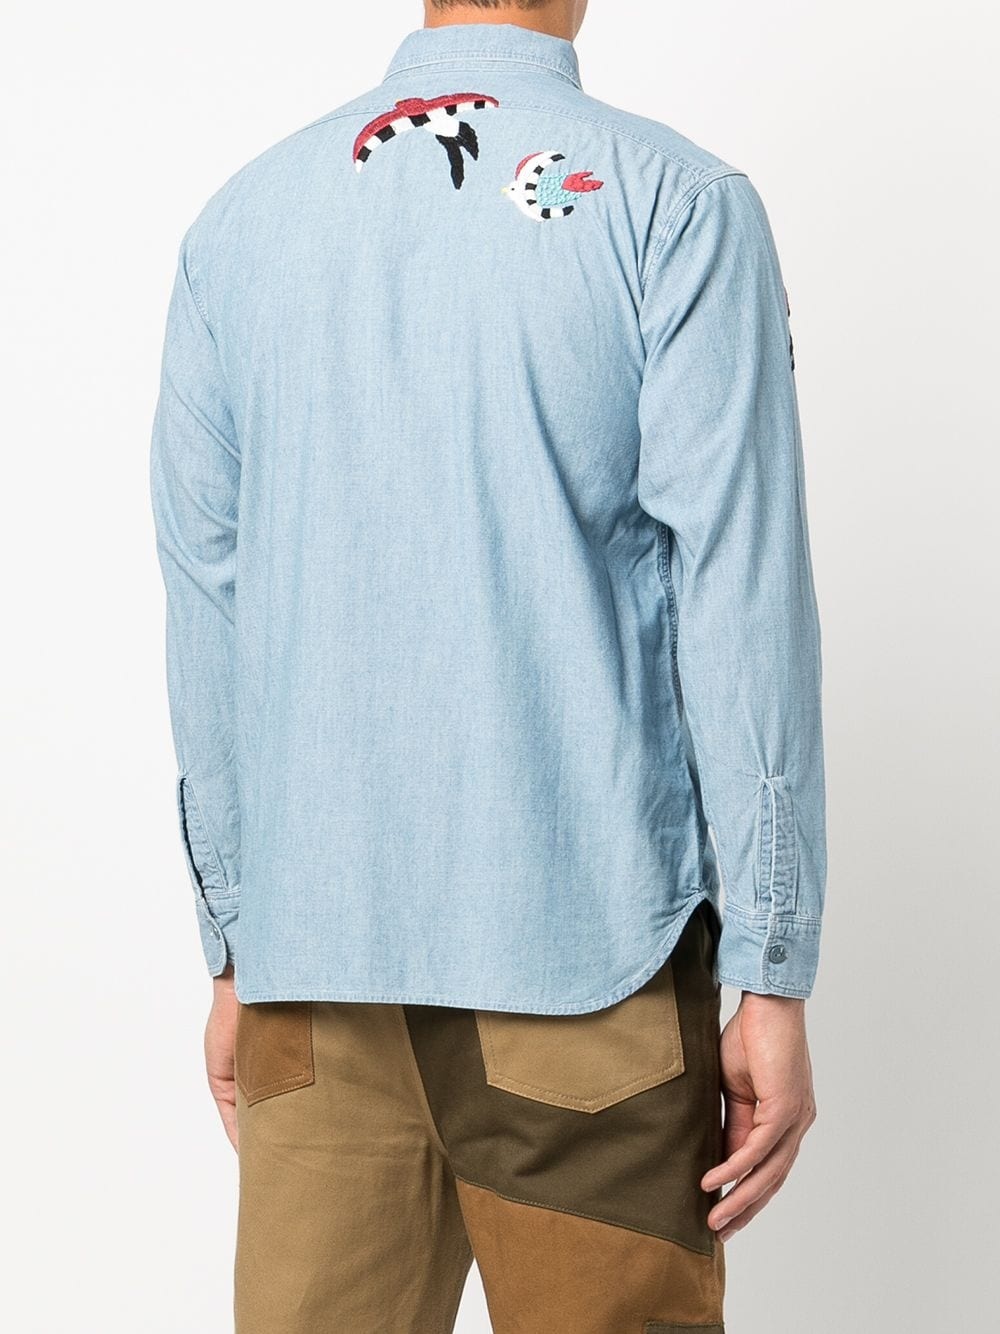 swallow-embroidered work shirt - 4